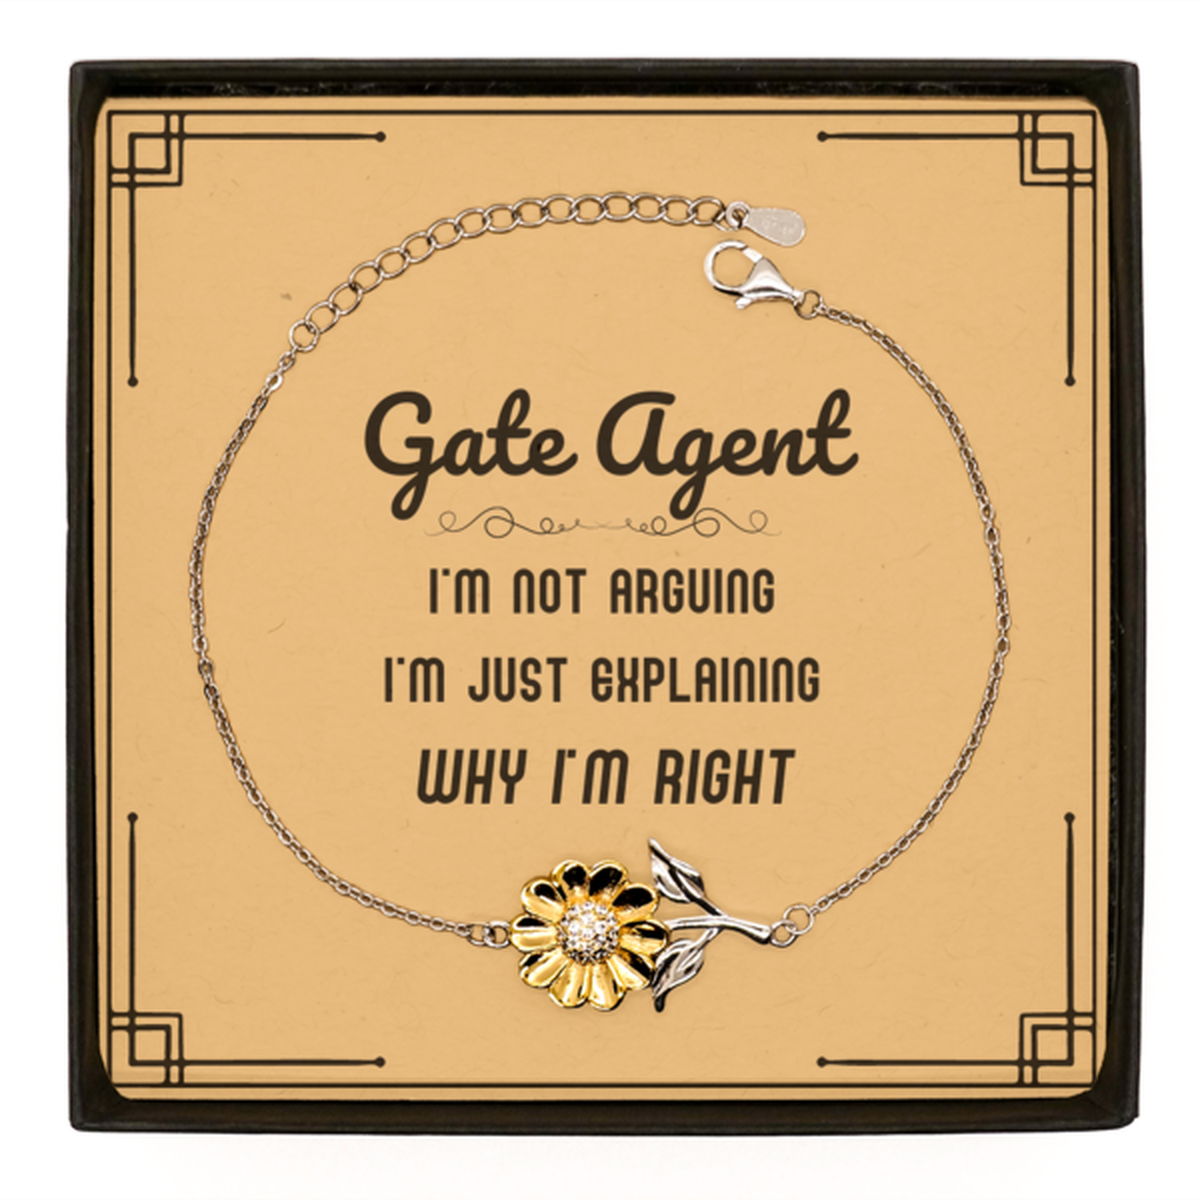 Gate Agent I'm not Arguing. I'm Just Explaining Why I'm RIGHT Sunflower Bracelet, Funny Saying Quote Gate Agent Gifts For Gate Agent Message Card Graduation Birthday Christmas Gifts for Men Women Coworker